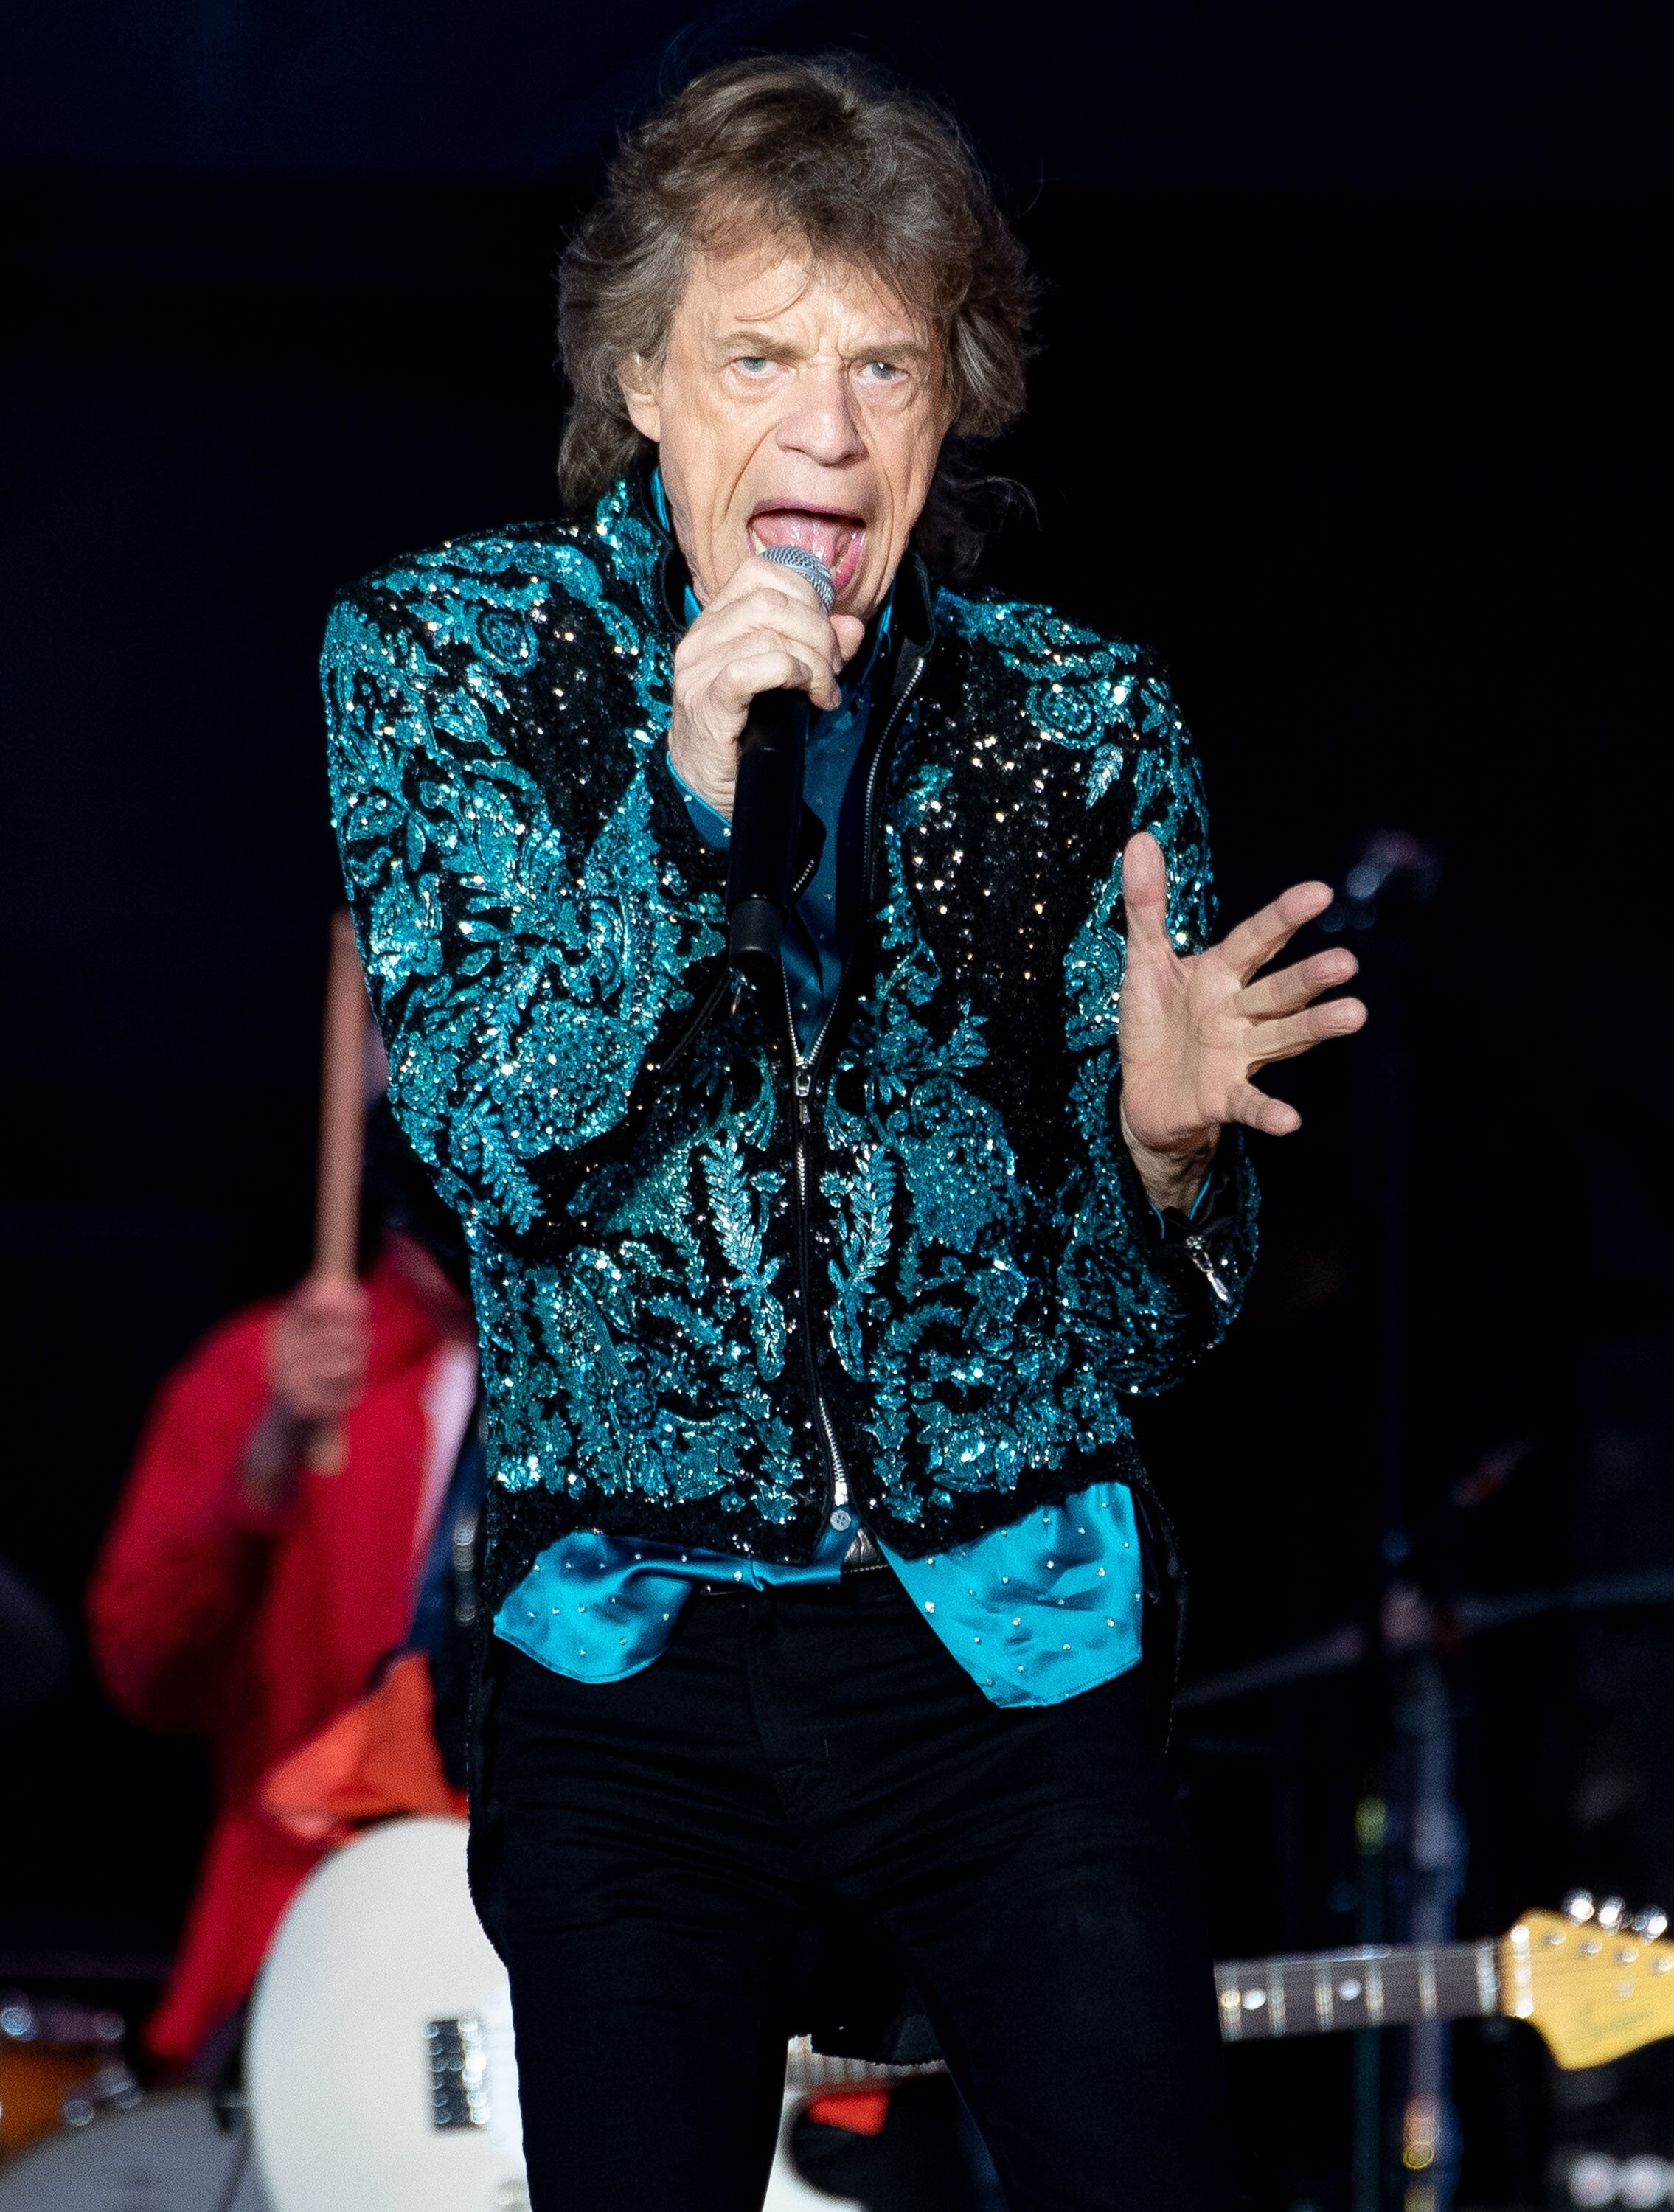 Mick Jagger performs at the Burl's Creek Event Grounds in Canada. | Source: Getty Images